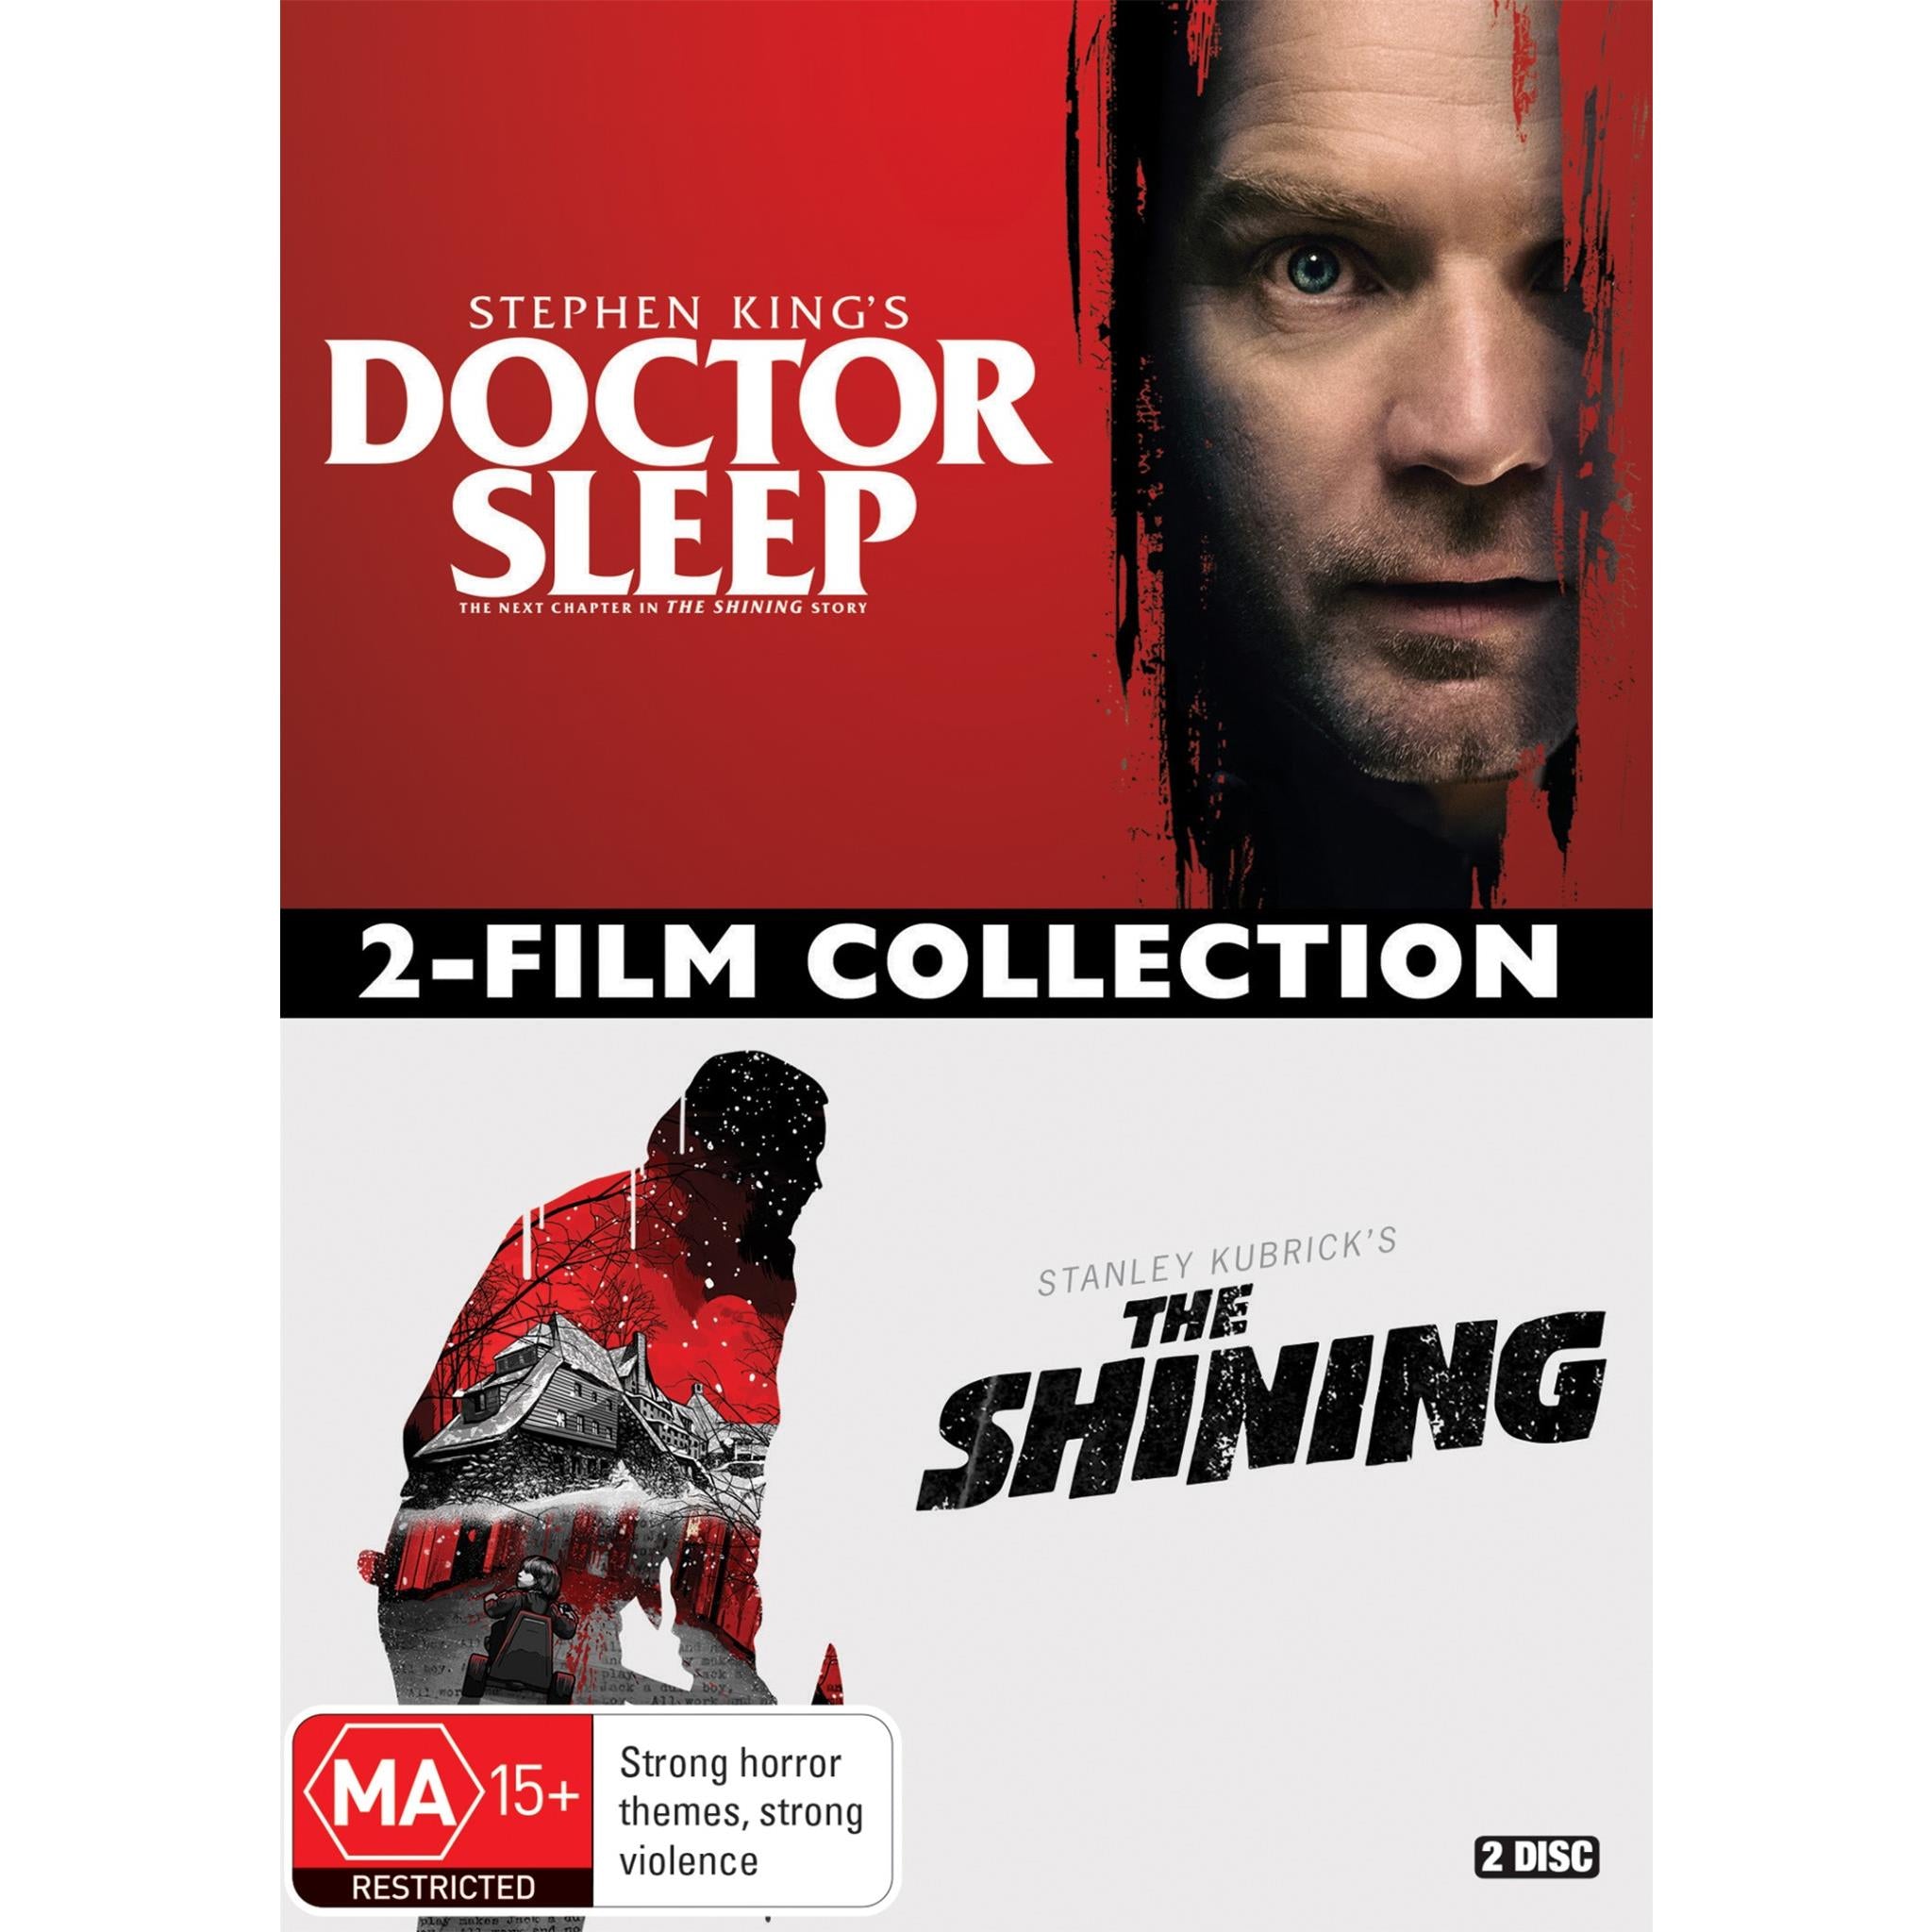 doctor sleep/ the shining - 2 film collection